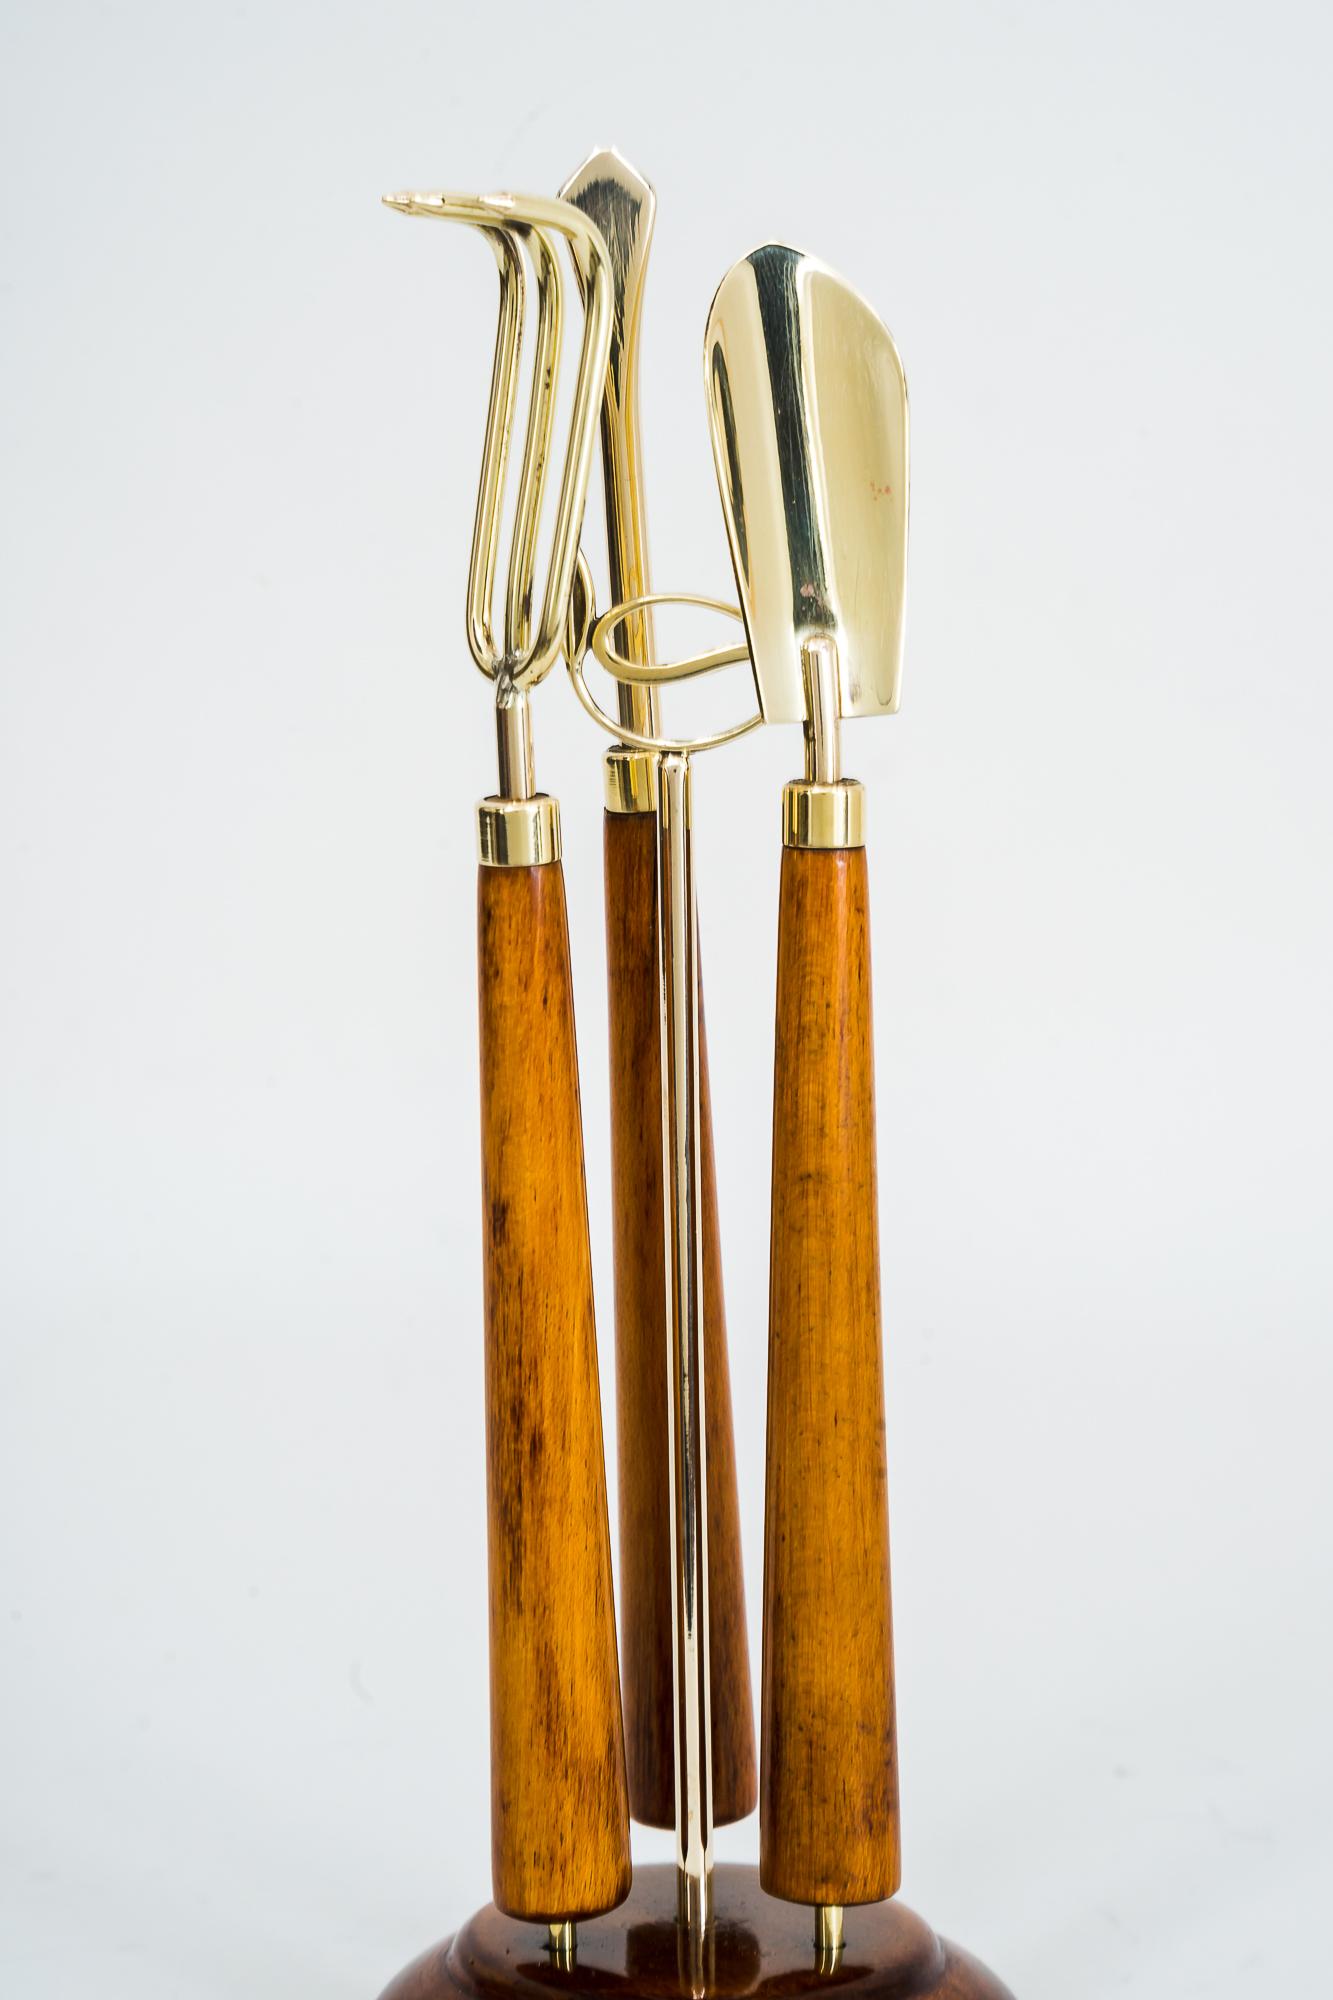 Mini garden tools with wooden handles, Set Of 4, 1970's 
Brass polished and stove enamelled
Nutwood
Made in a very high quality.